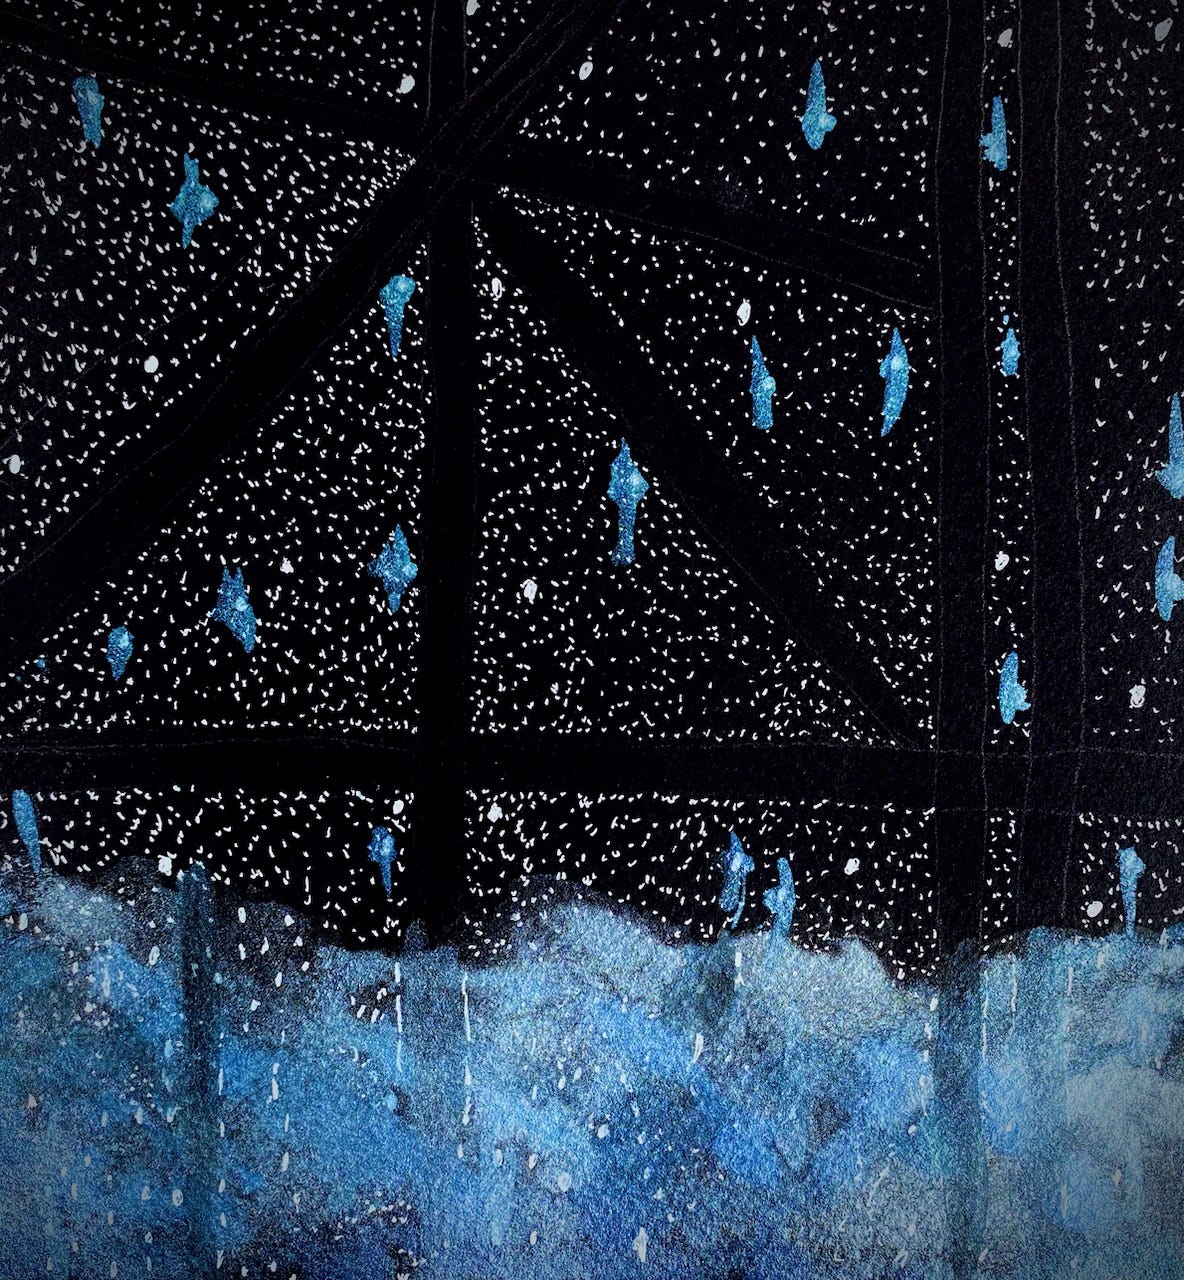 An abstract watercolor featuring a web of inky dark spaces and illuminated stars in white and metallic blue.